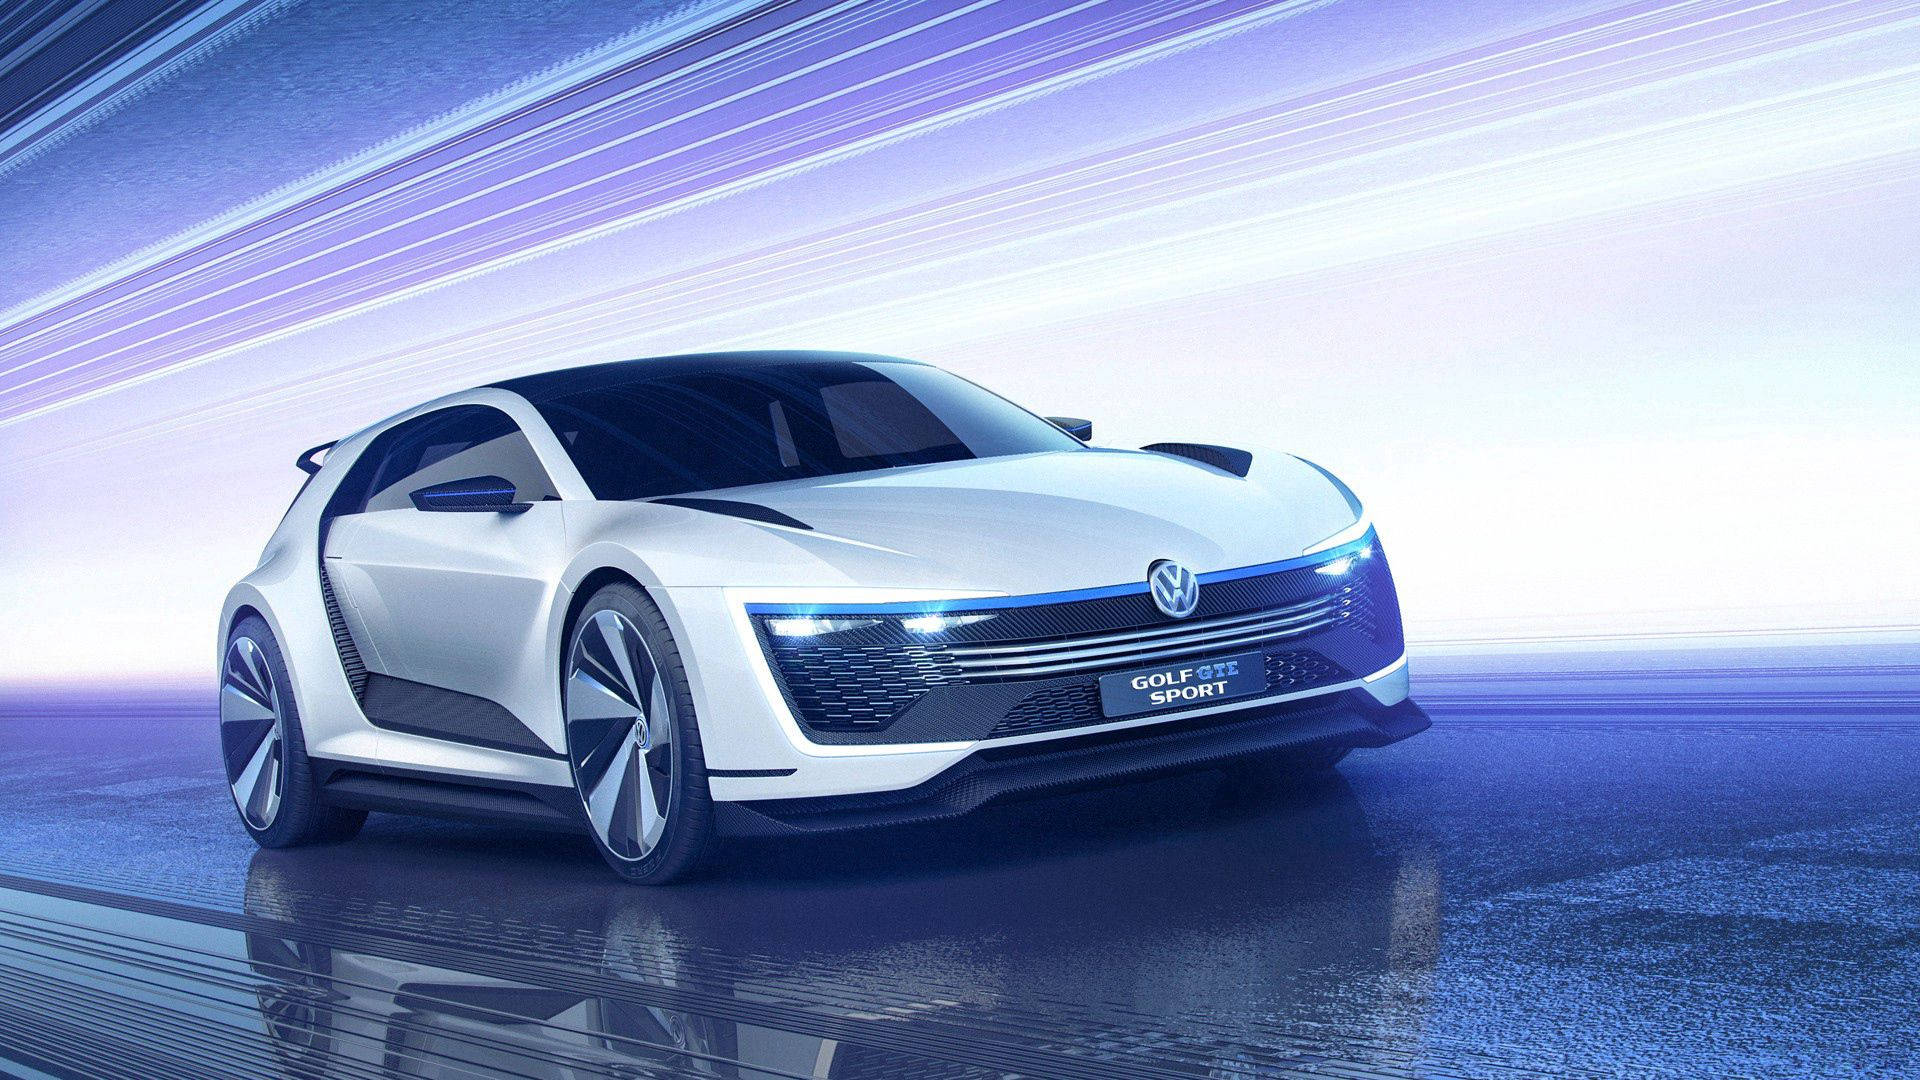 Take Your Golf Game To The Next Level With The Volkswagen Golf Gte Sports Car Concept Background